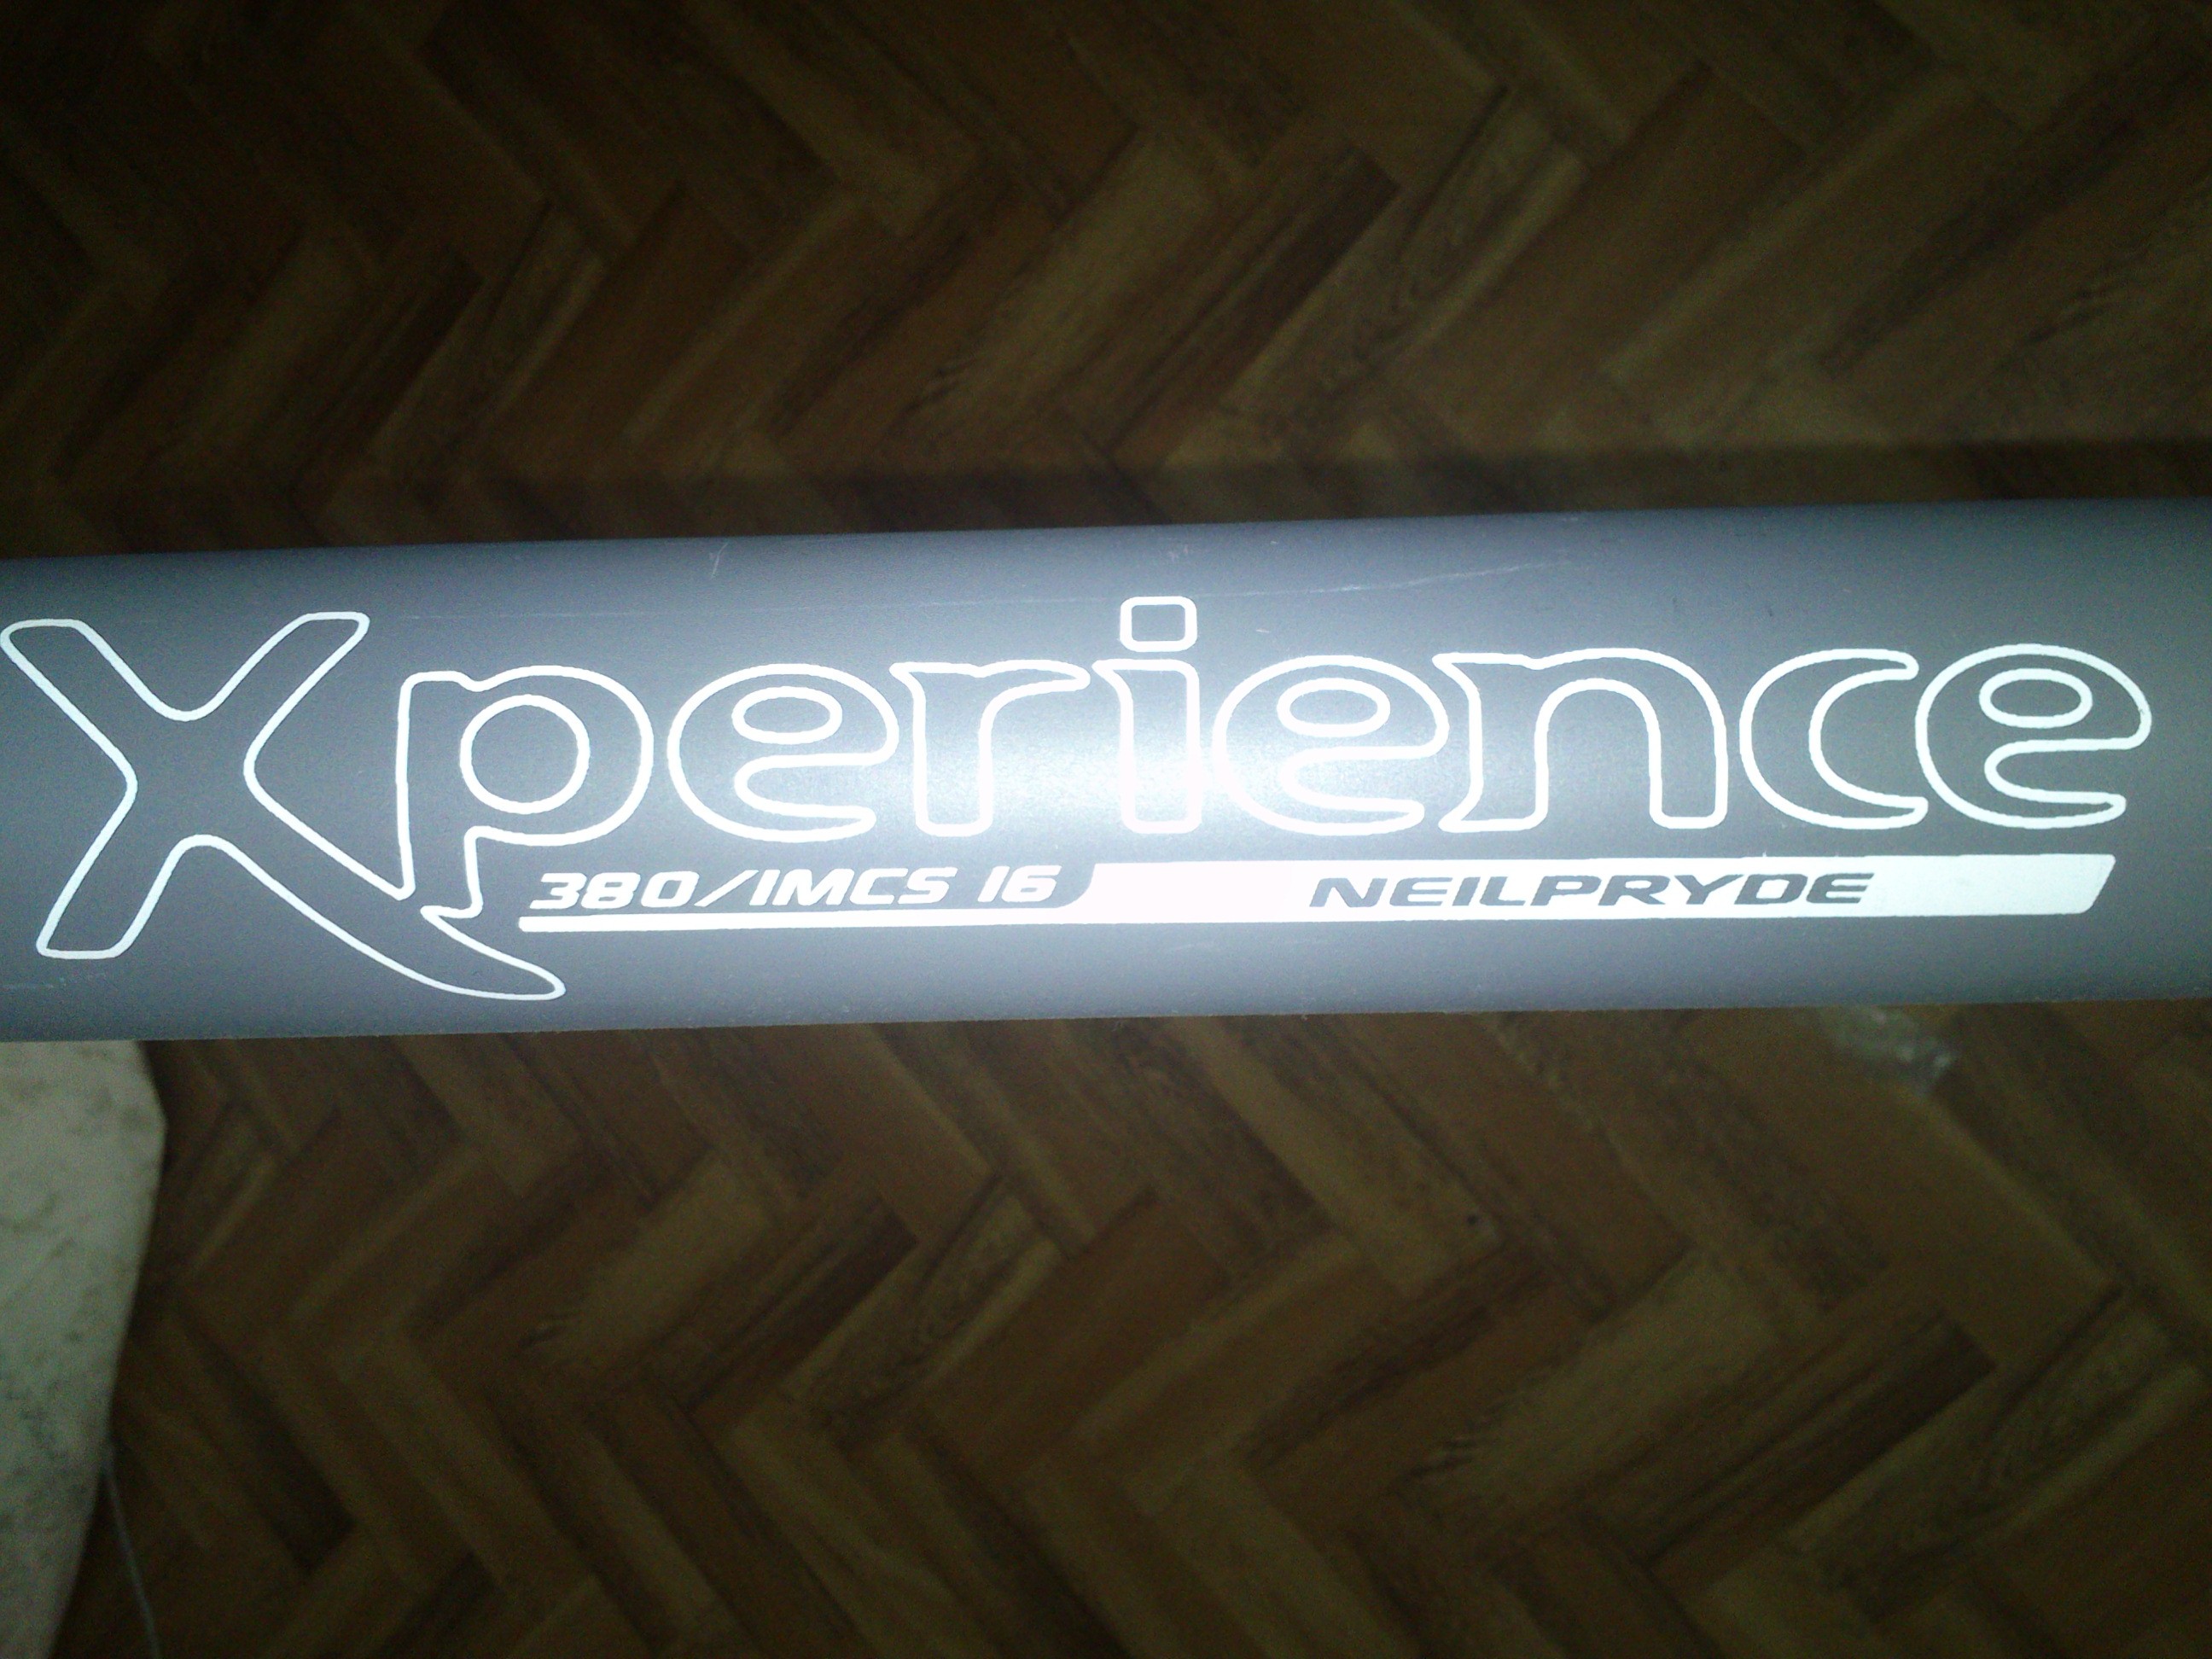 xperience 380